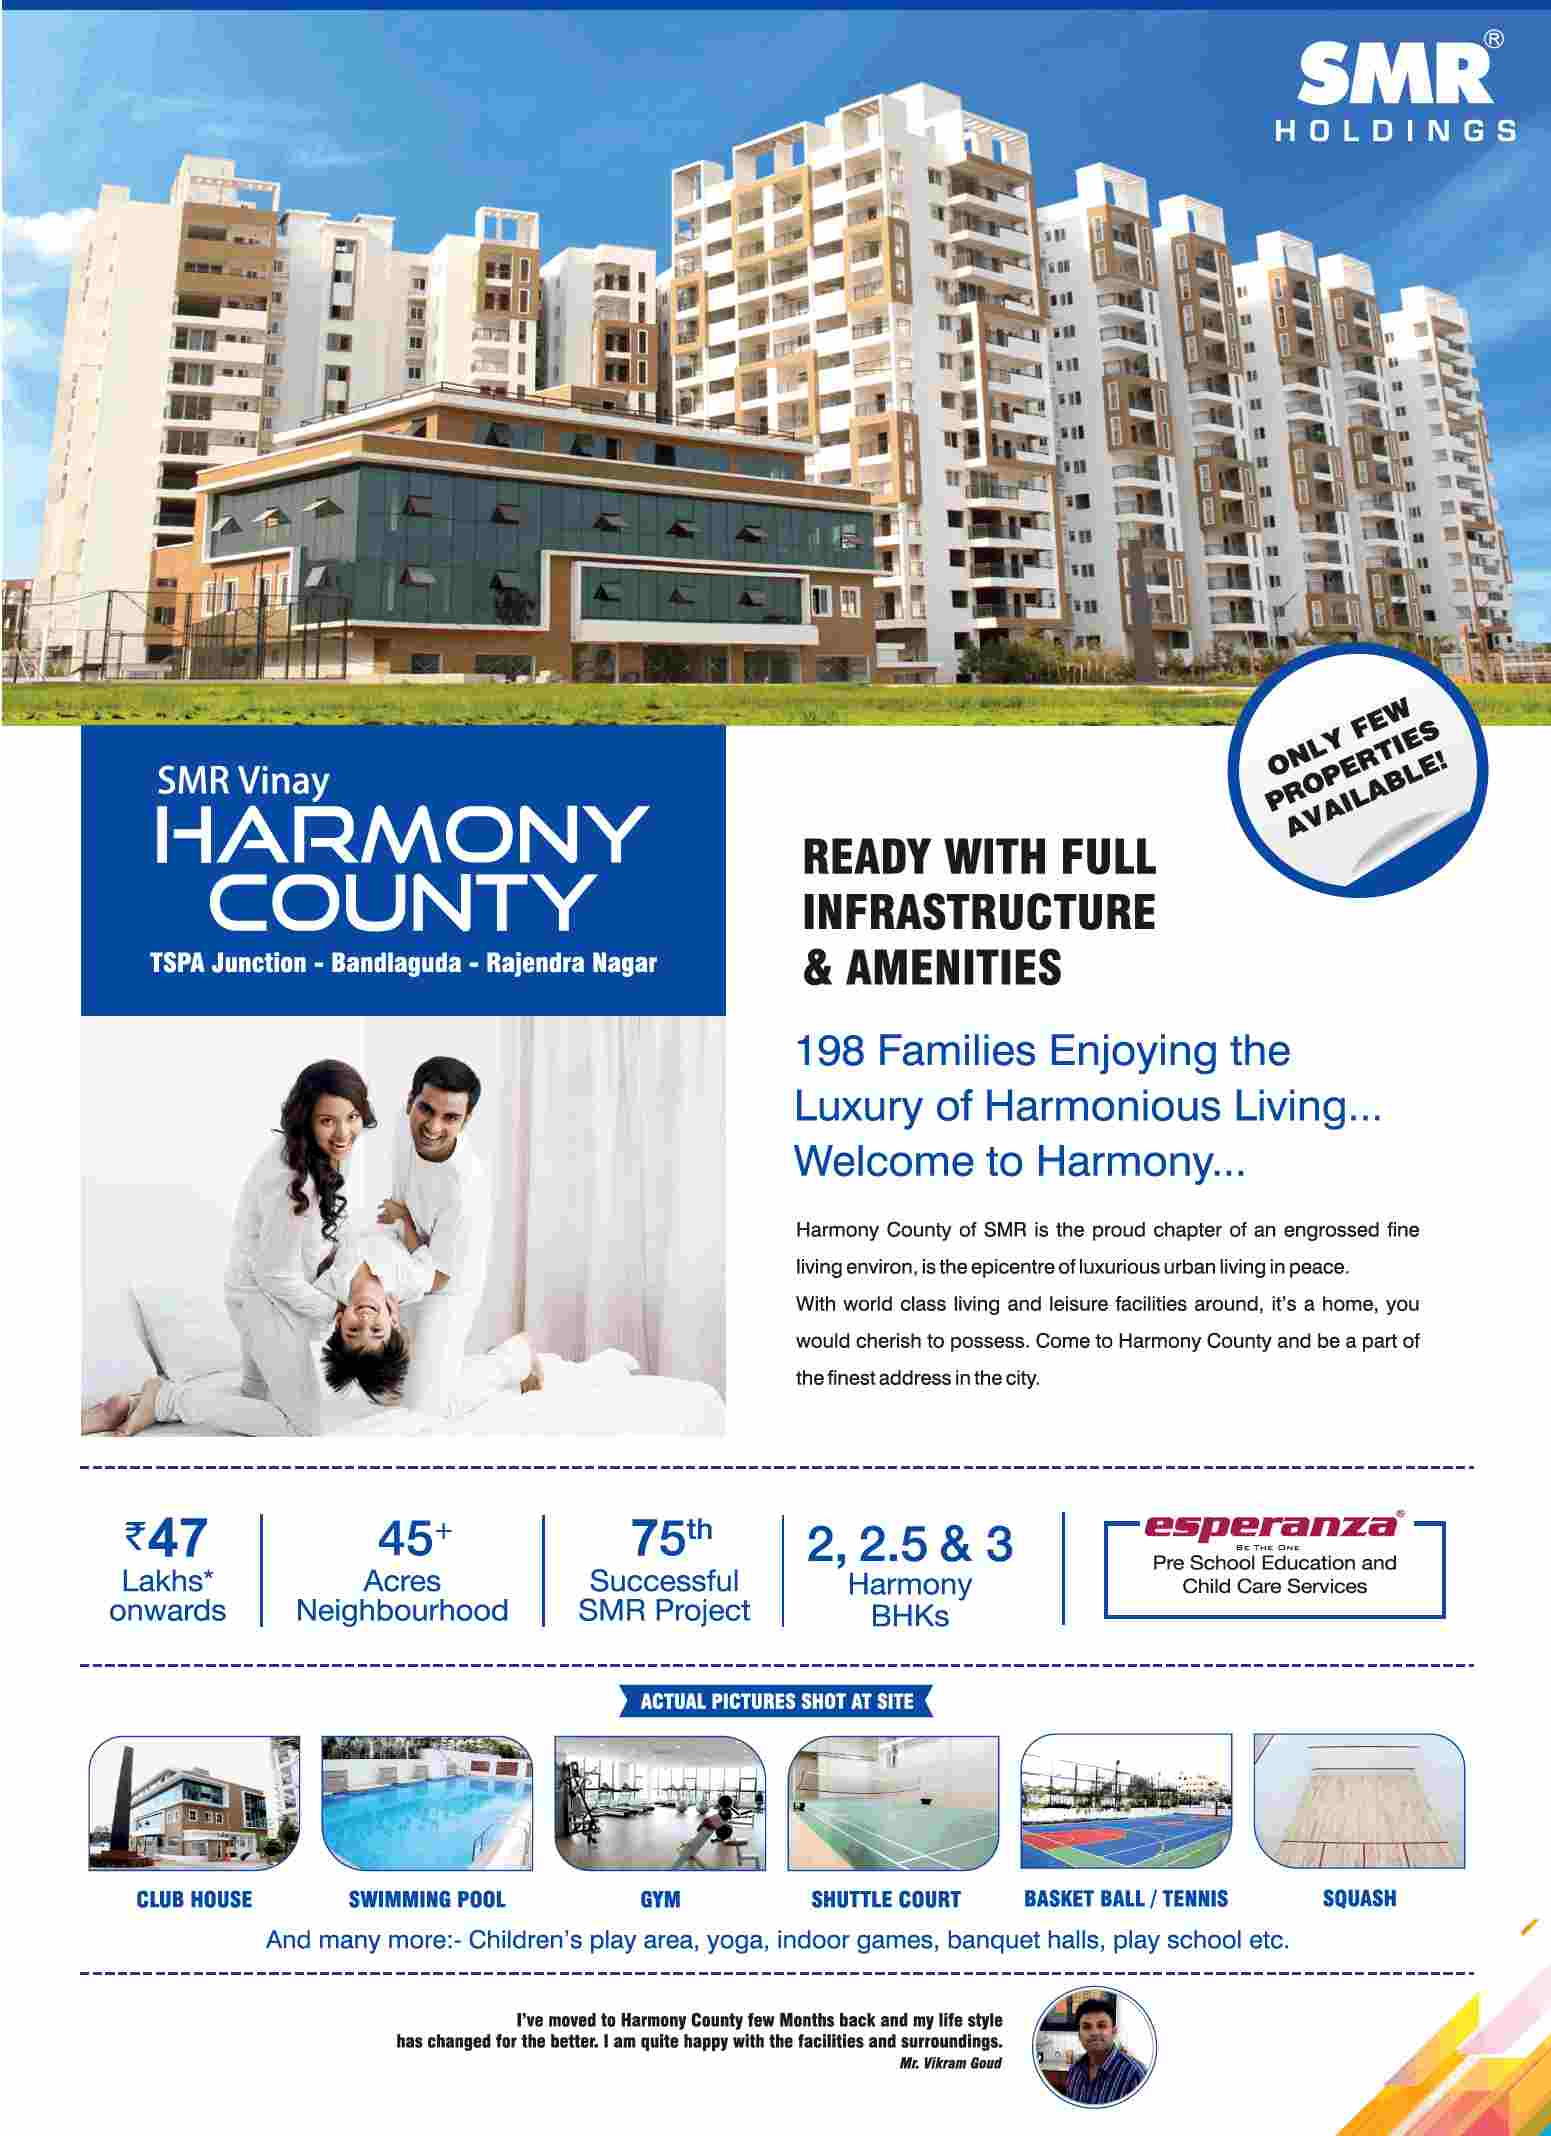 SMR Vinay Harmony County is ready with full infrastructure & amenities in Hyderabad